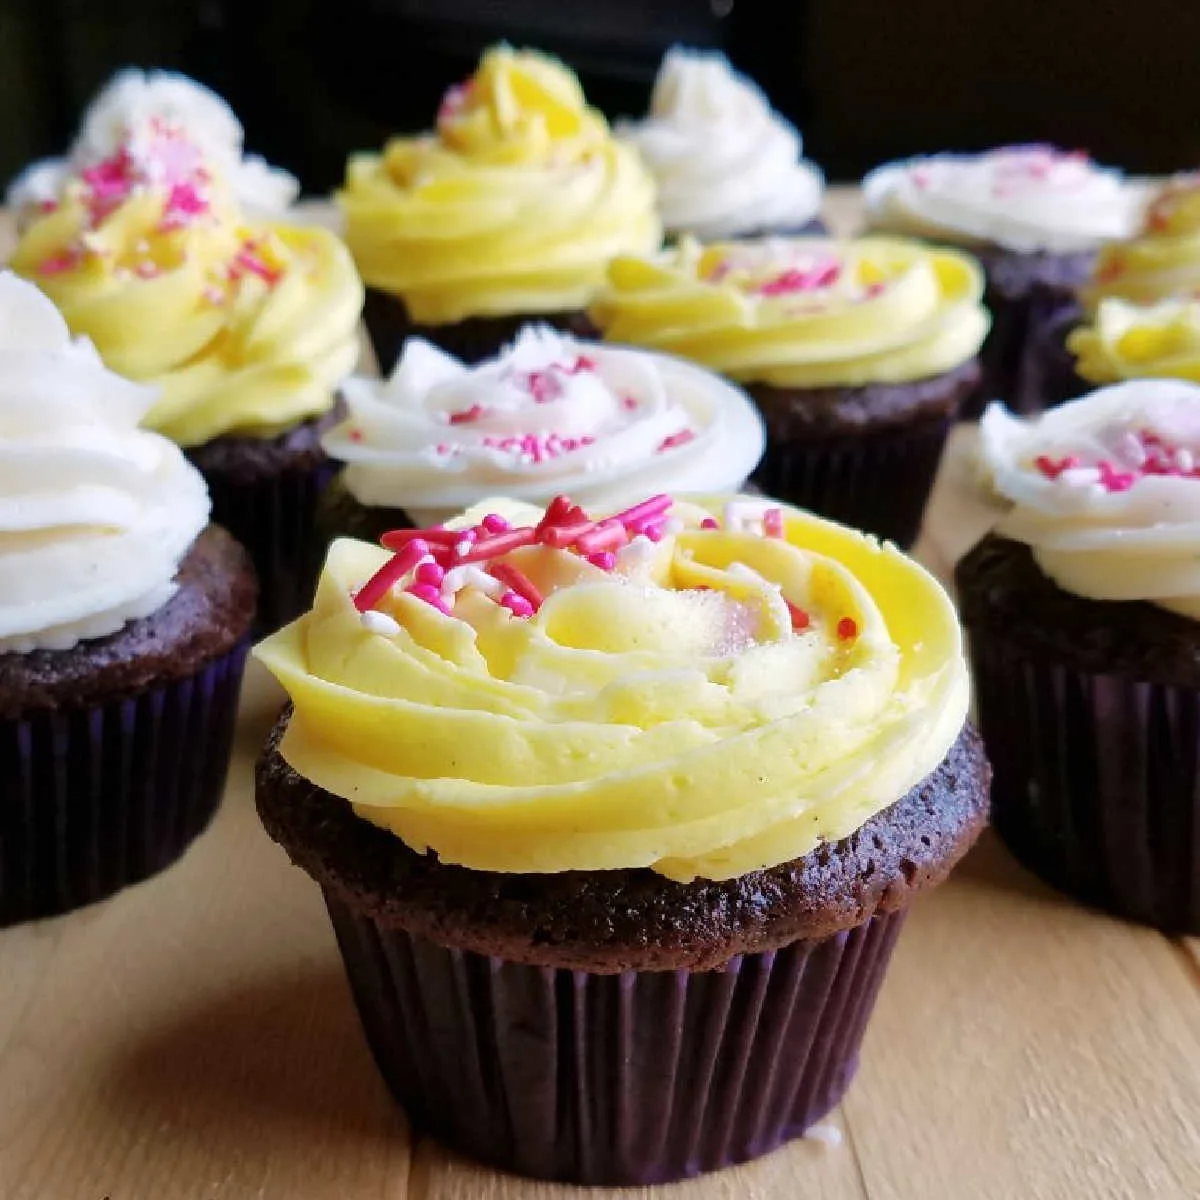 Rich chocolate cupcakes decorated with white and yellow condensed milk buttercream and pink and white sprinkles.